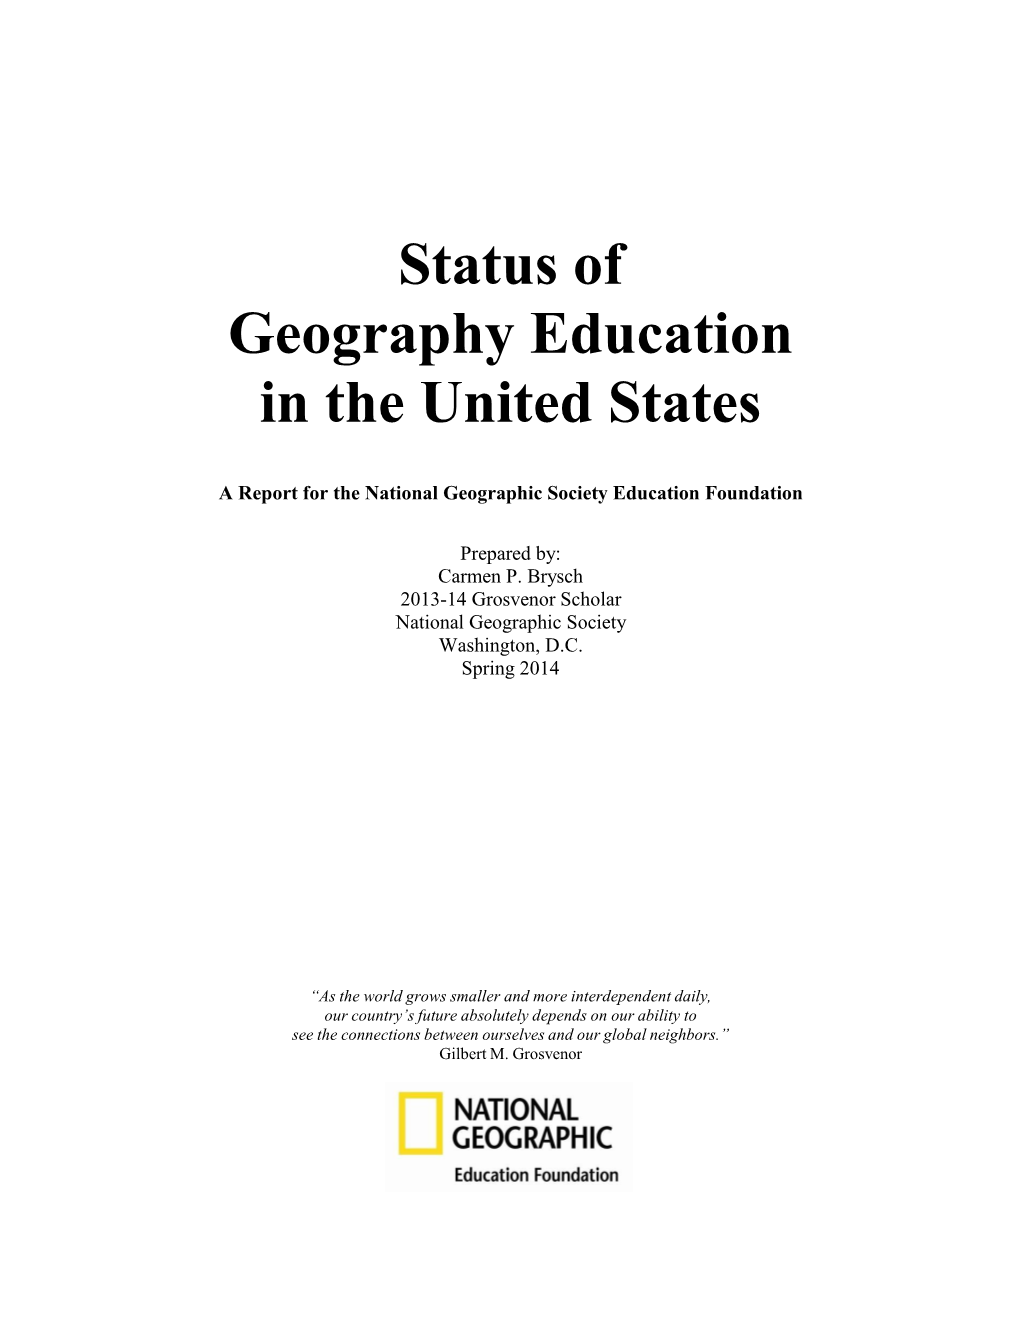 Status of Geography Education in the United States